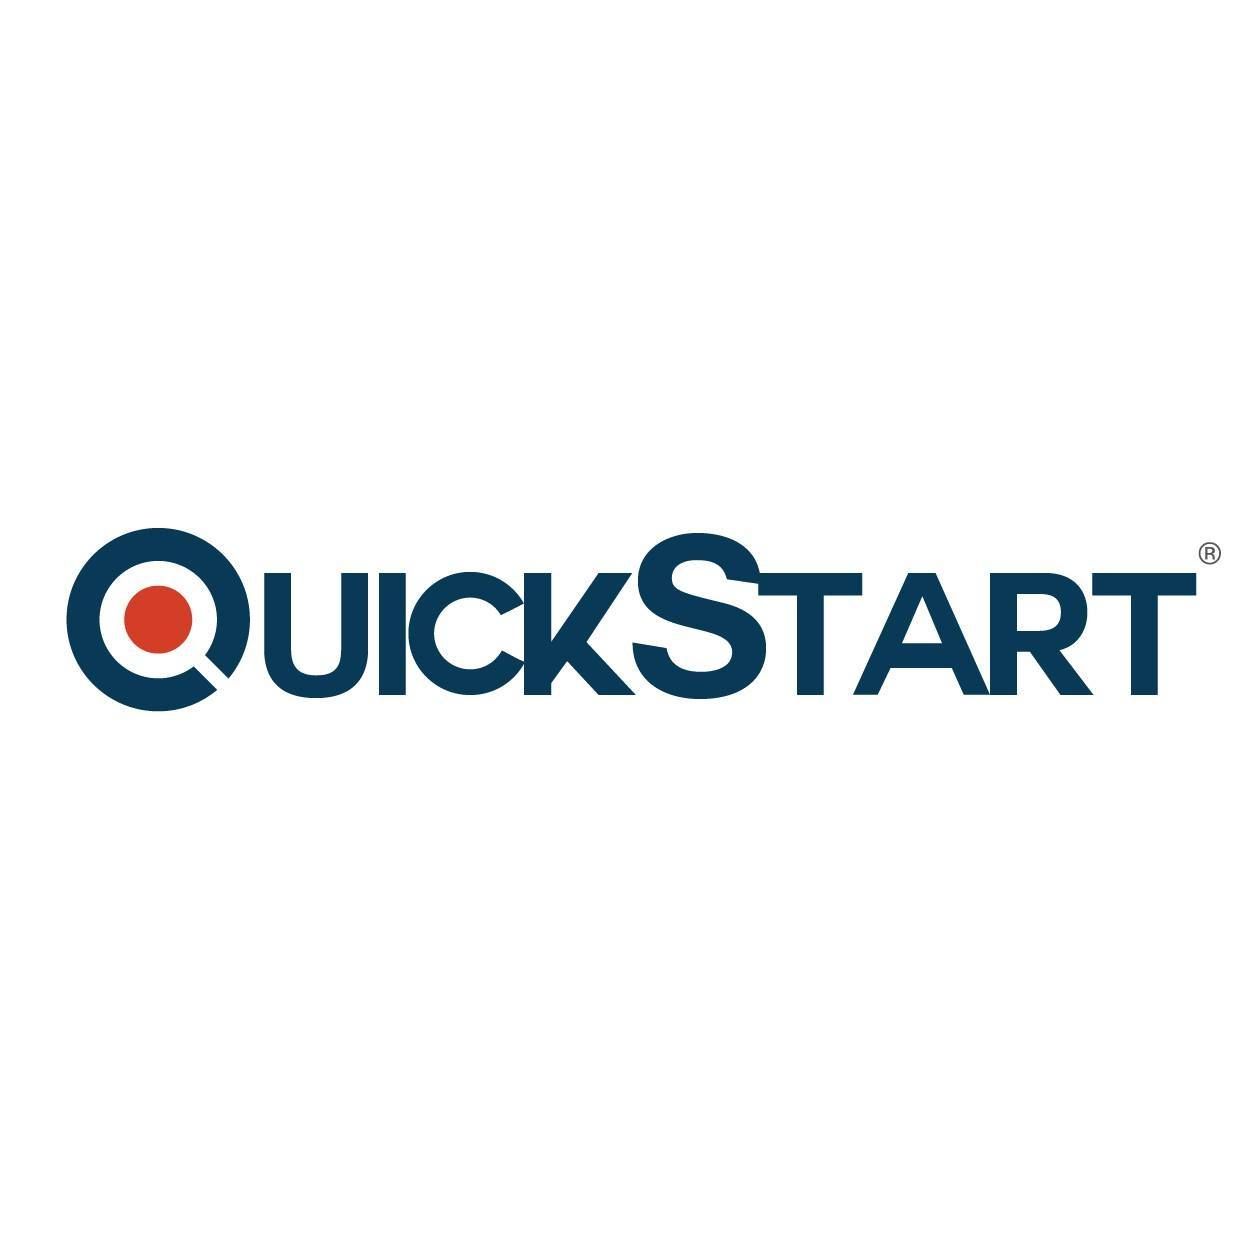 Take the security+ certification course today - QuickStart